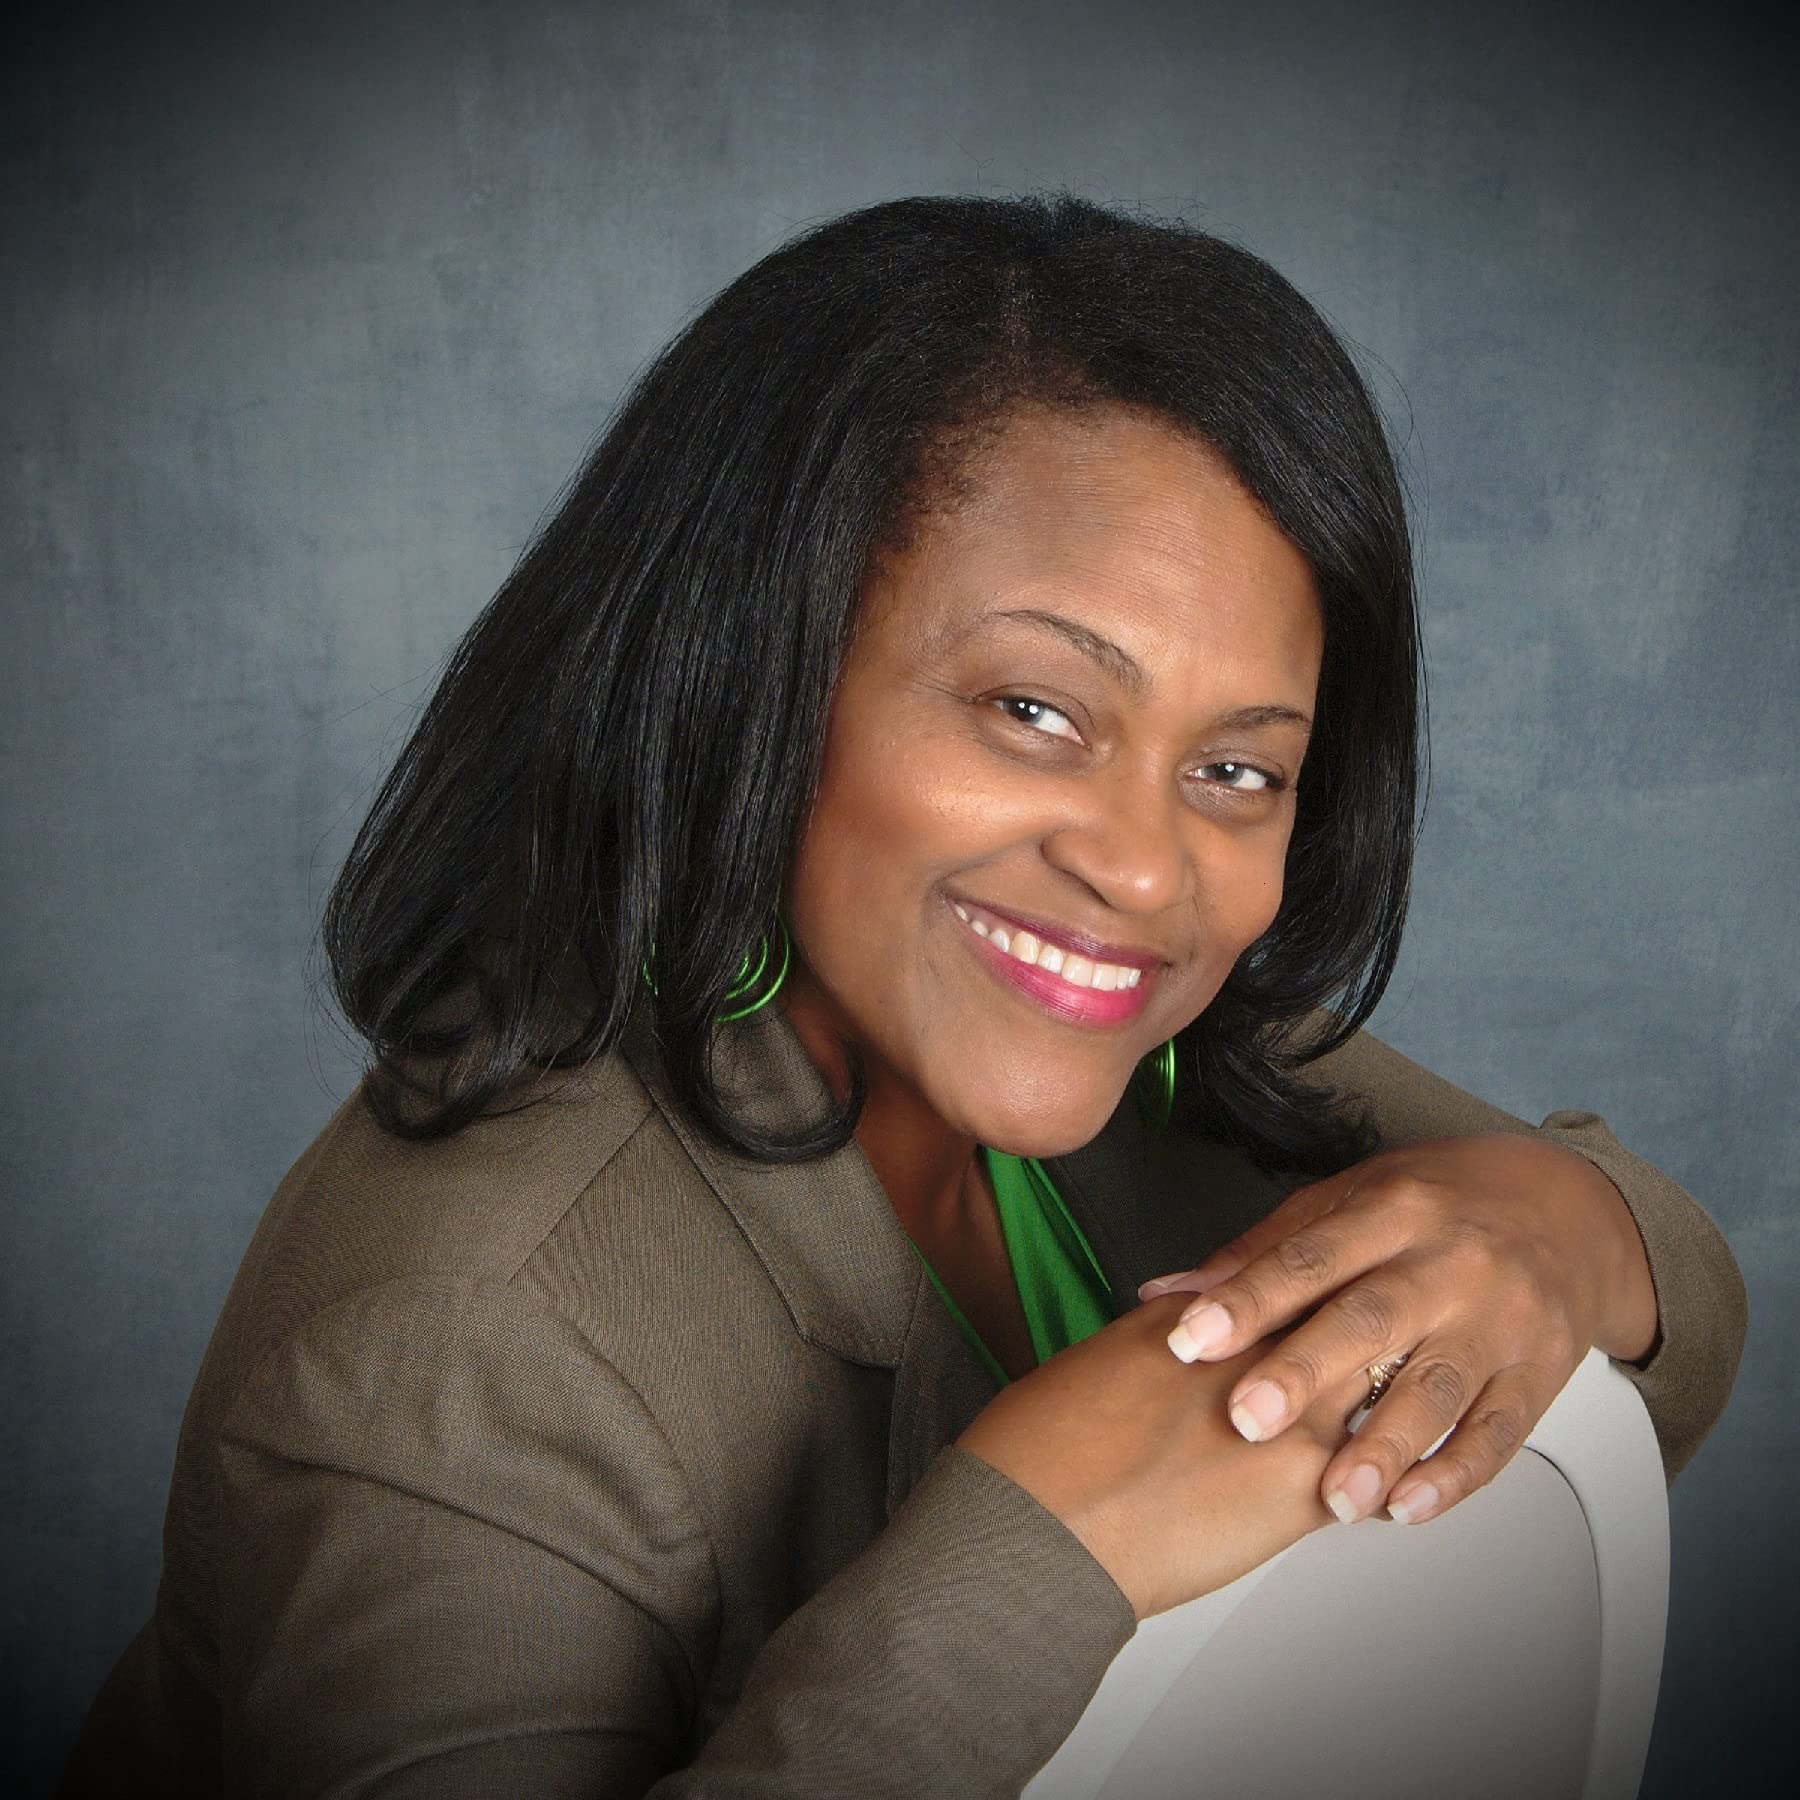 Author head shot: Black woman smiling with gray shirt